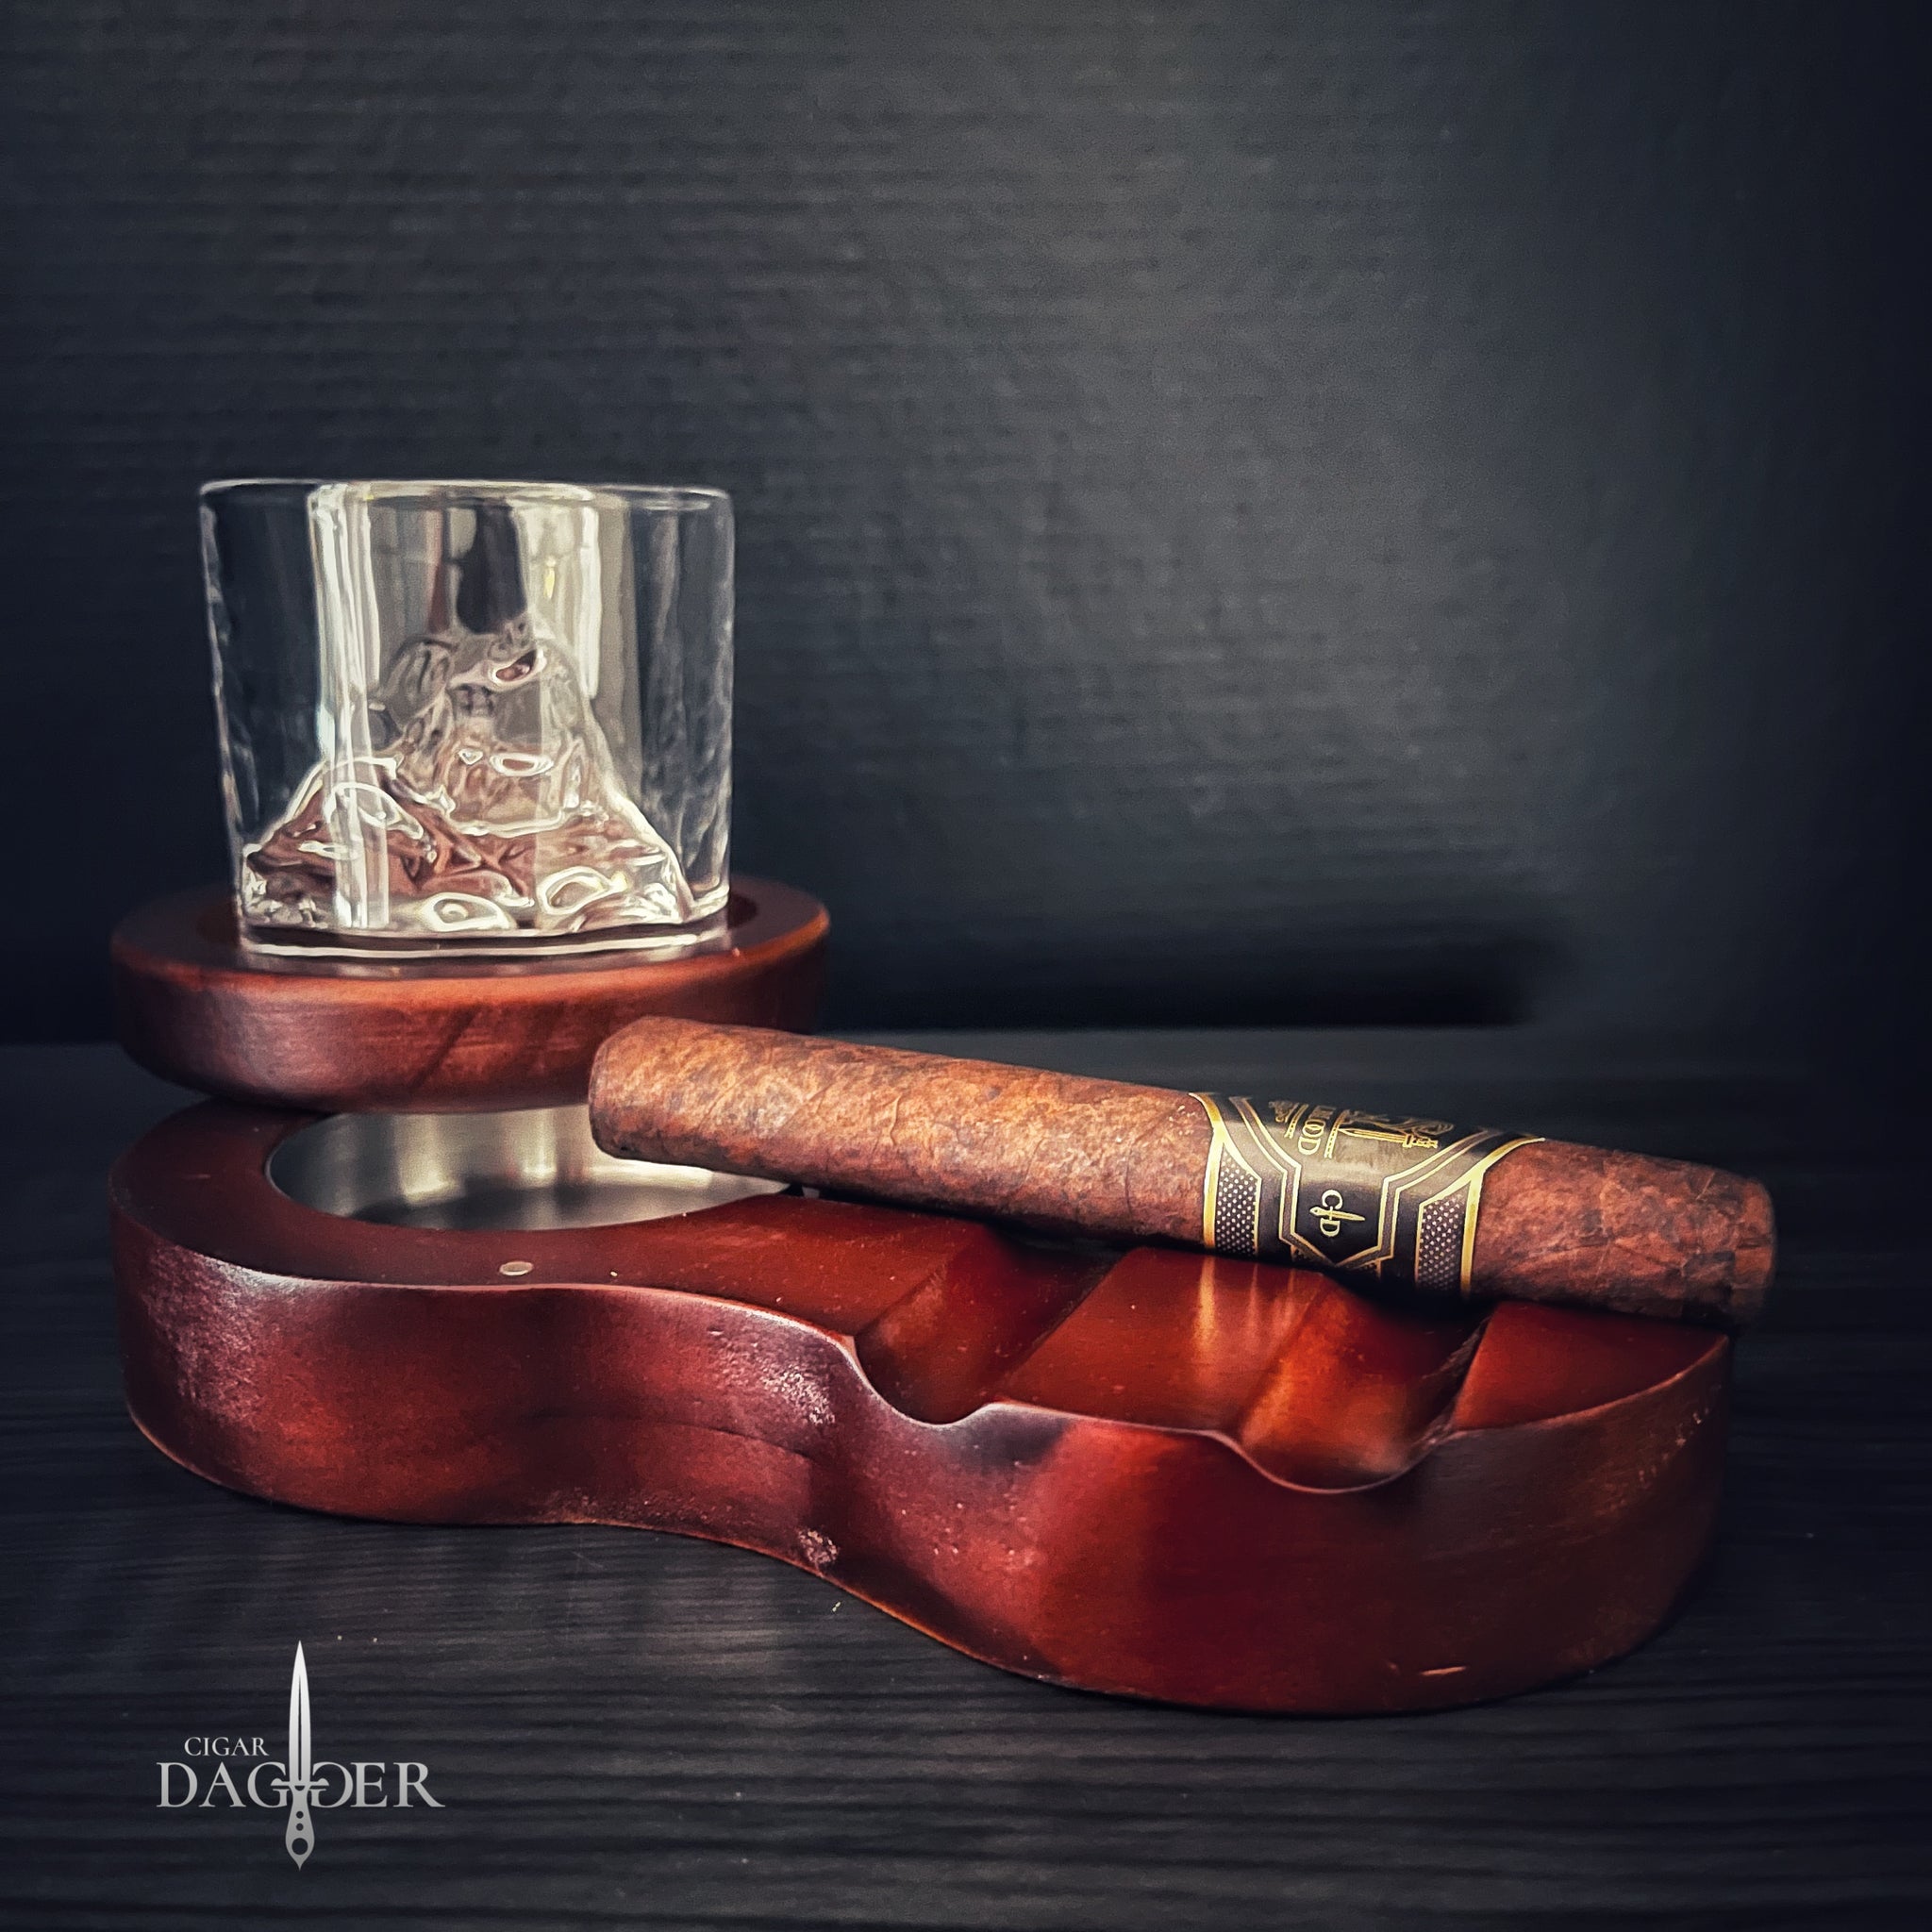 The Whiskey and Cigar Tray - Ashtray, Rest and Coaster – Cigar Dagger